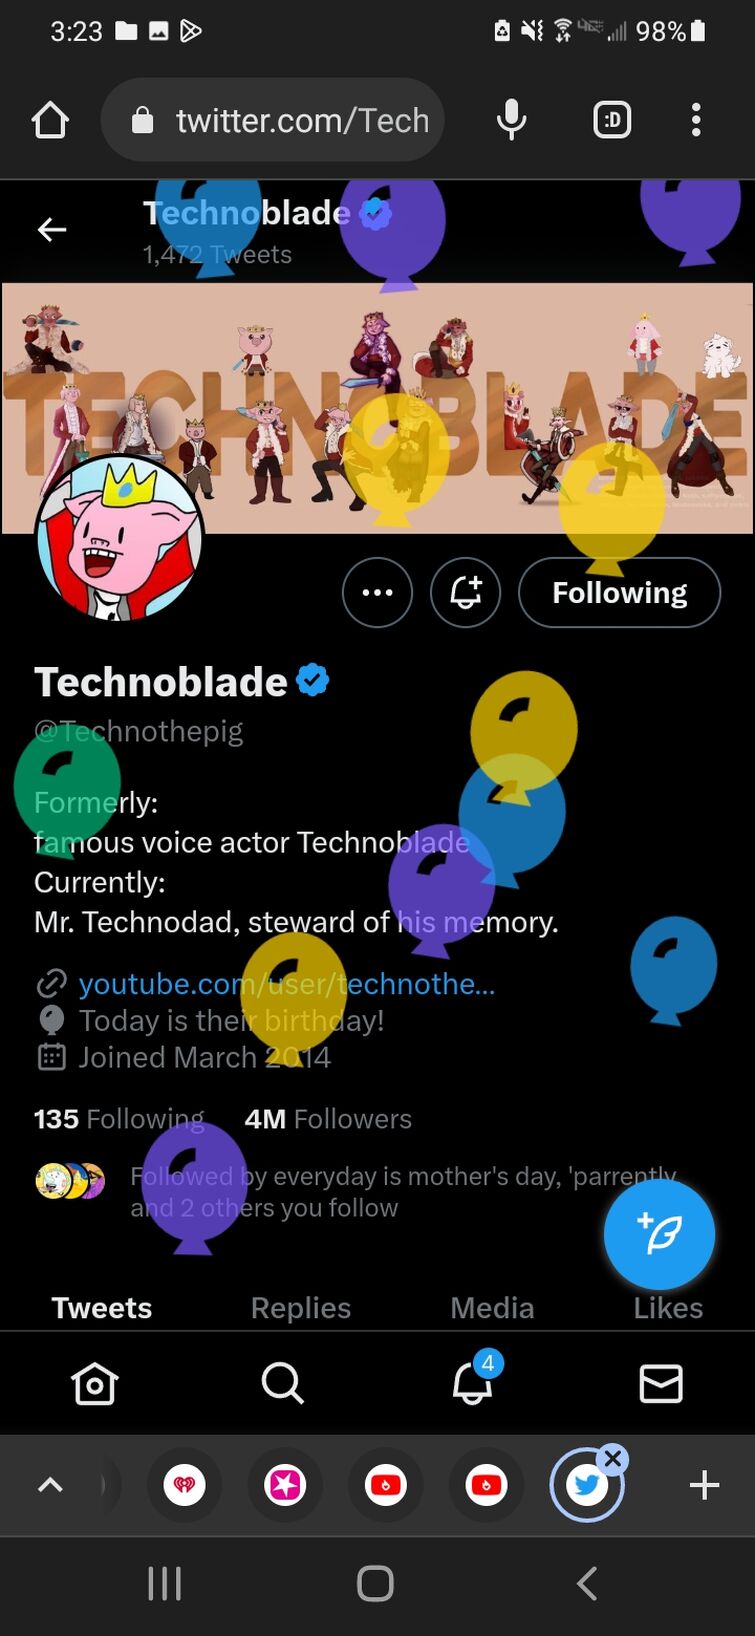 it's officially been 1 year since Technoblade's passing, he was a